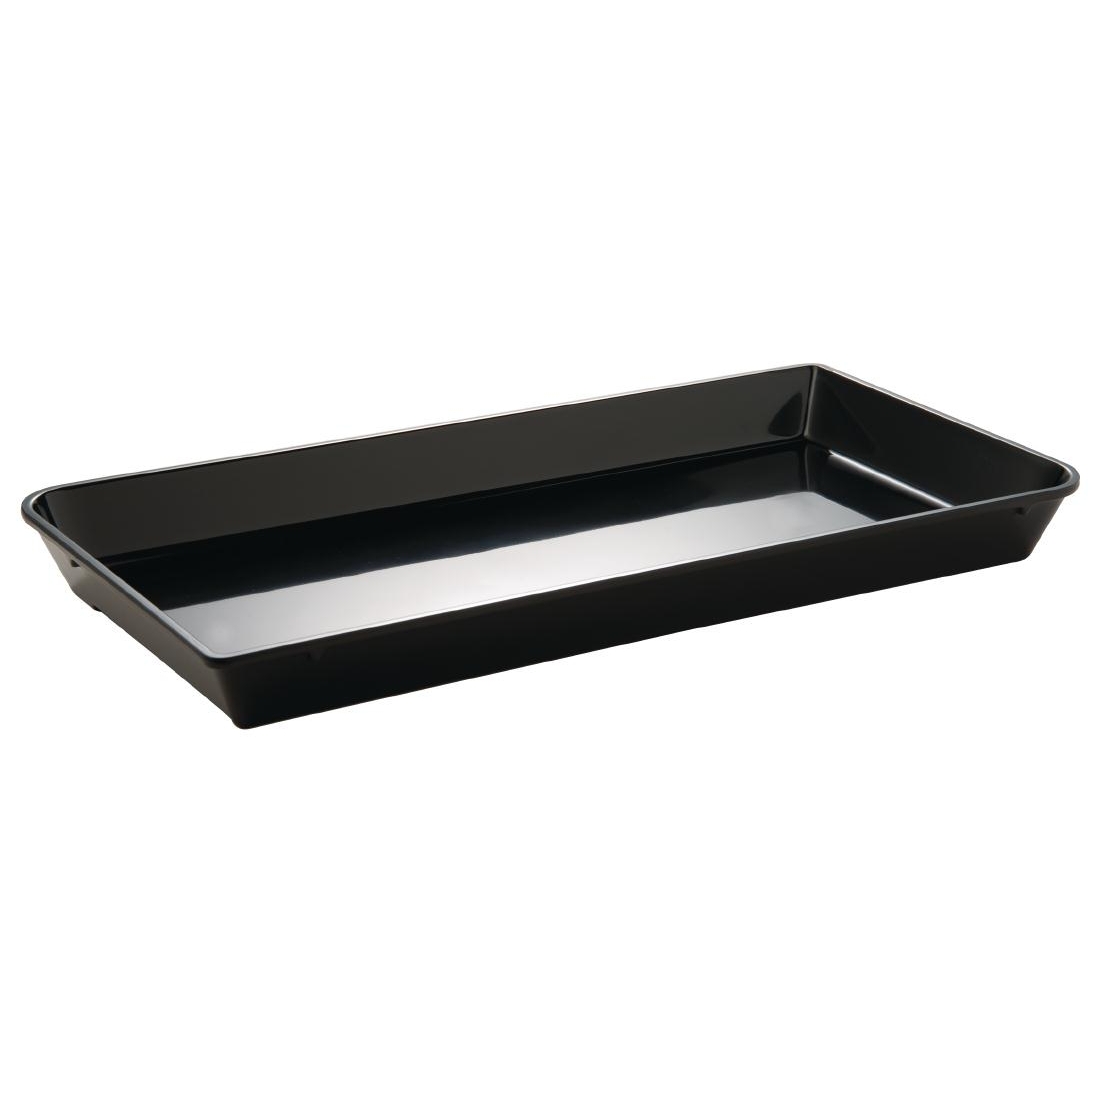 APS Black Counter System 440 x 220 x 40mm